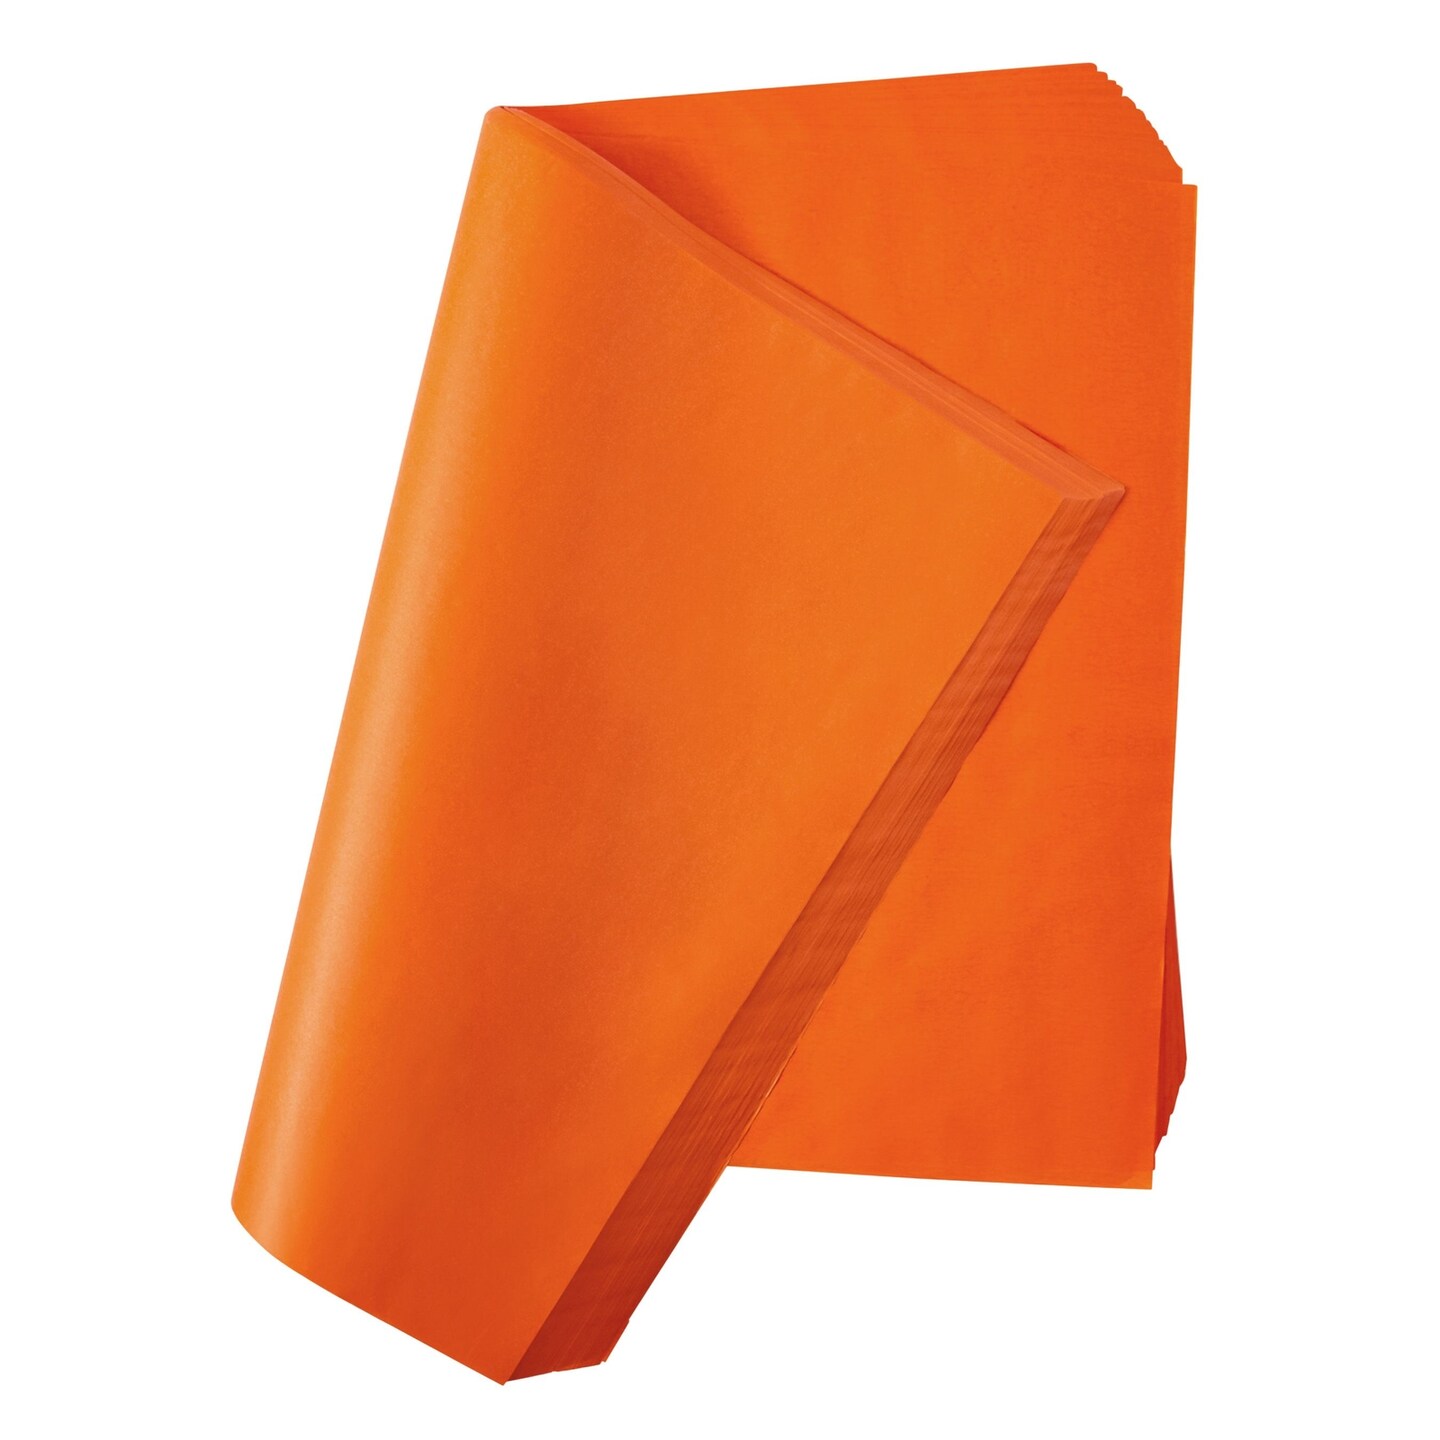 160 Sheets Orange Tissue Paper for Gift Wrapping Bags, Bulk Set